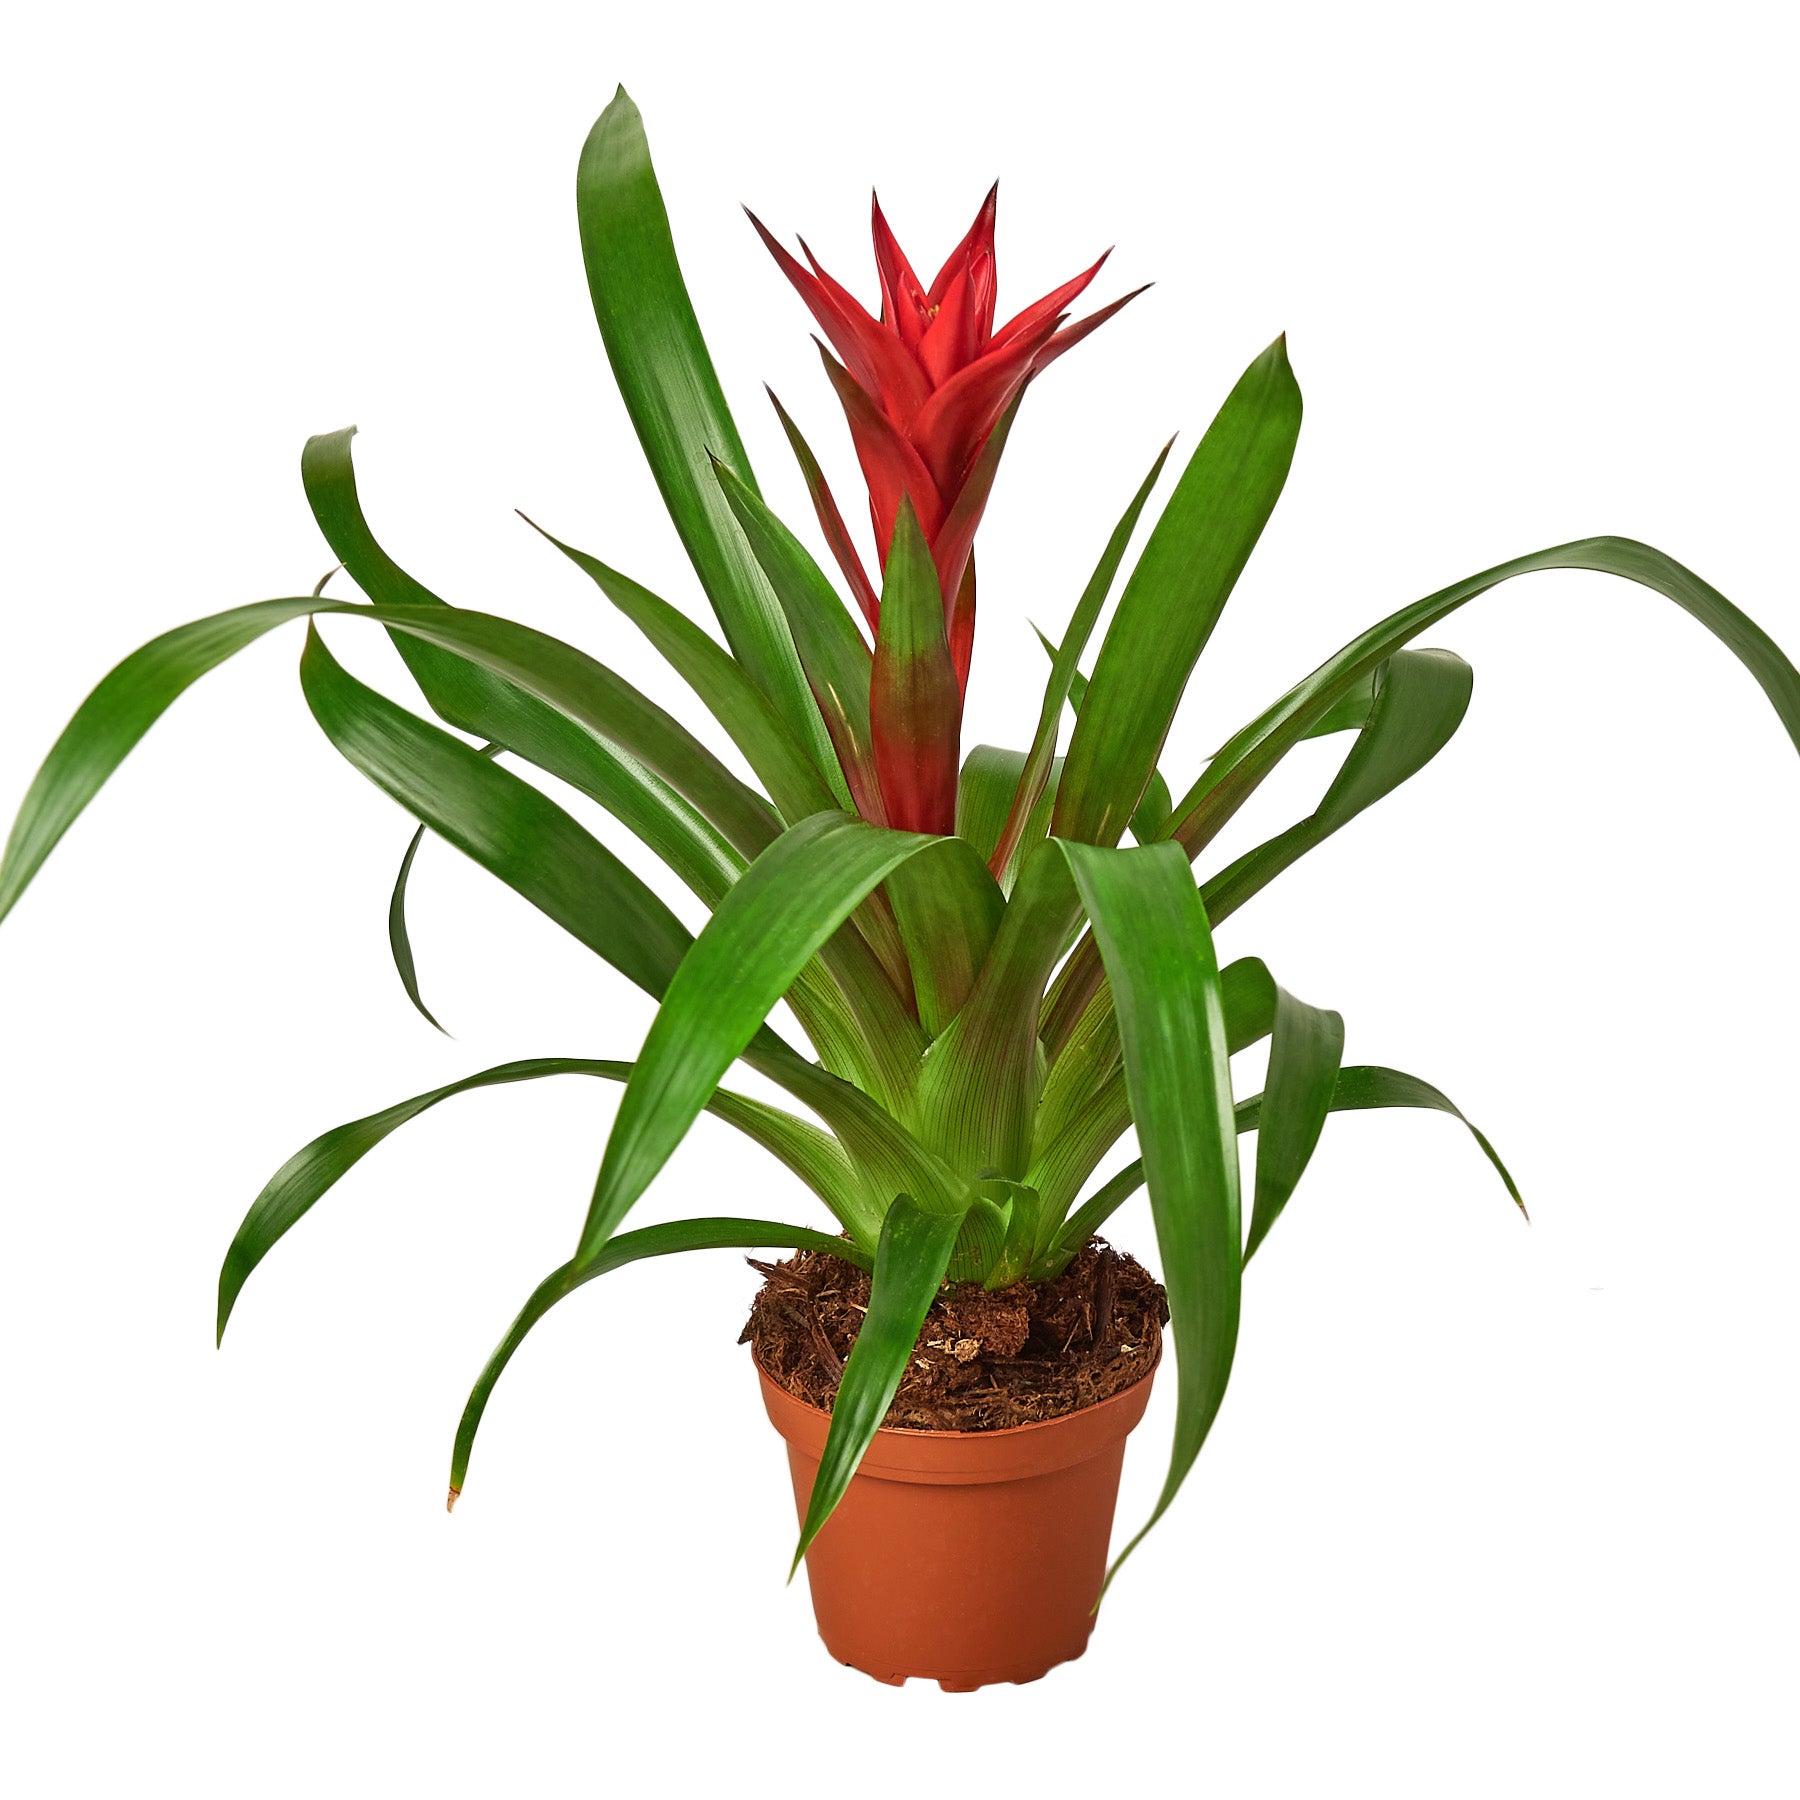 A red bird of paradise plant in a pot on a white background, available at the best garden nursery near me.